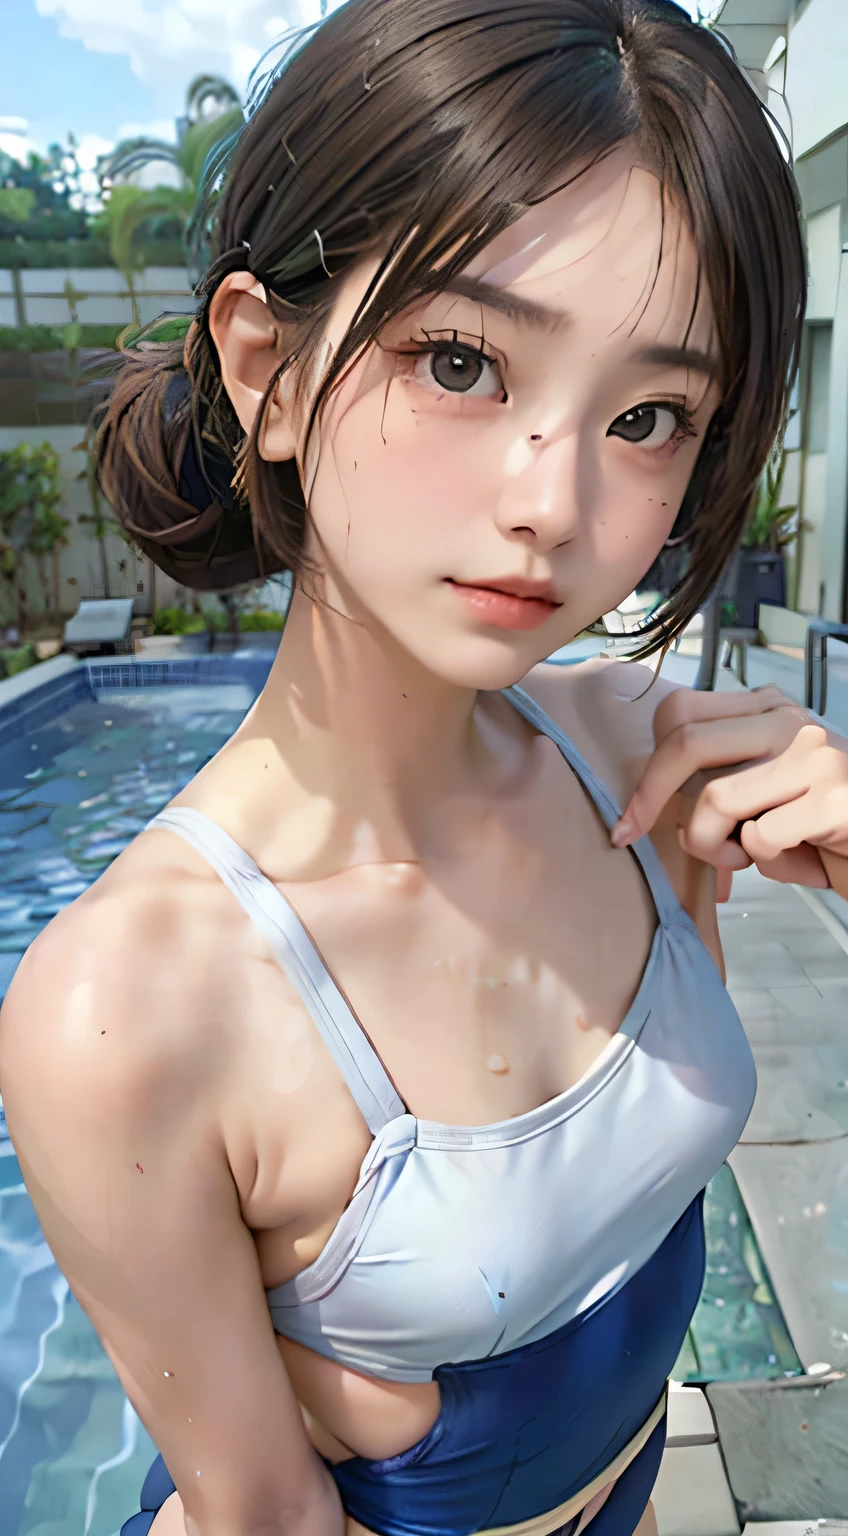 highest quality, RAW Photos, Realistic, face, Incredibly beautiful girl, cute, length Hair,ponytail，Glasses，Written boundary depth, High resolution, Super detailed, detailed, Very detaileded, extremely detaileded eye and face, Sharp pupils, Realistic students, Sharp focus, Cinema Lighting, Japanese, Short Woman,  Physical build, Short arms, length, Narrow eyes, Fleeting atmosphere, 30 years old, Brown bob hair, ((thin lips)), White top and bottom underwear, masterpiece, highest quality, Detailed skin, Detailed face, fine grain, 8k, Excellent anatomy, Upper body portrait，flat breasts, small breasts, small,( small bust: 1.2), small bust, (slim, small, flat, small), thin, Delicate and sexy collarbone, One Girl, (beautiful girl, Delicate girl:1.3), (15 years old:1.3),
break, (One Piece Swimwear, Swimwear:1.2),
break, (Pool:1.3),
break, Very beautiful eyes, (Symmetrical eyes:1.3),
break, , Brown eyes, Parted bangs, Brown Hair, (Upper teeth, The best smile:0.2),
break, (Eyes and face detail:1.0),
break, (masterpiece, highest quality, Super detailed, Detailed face, 8k)